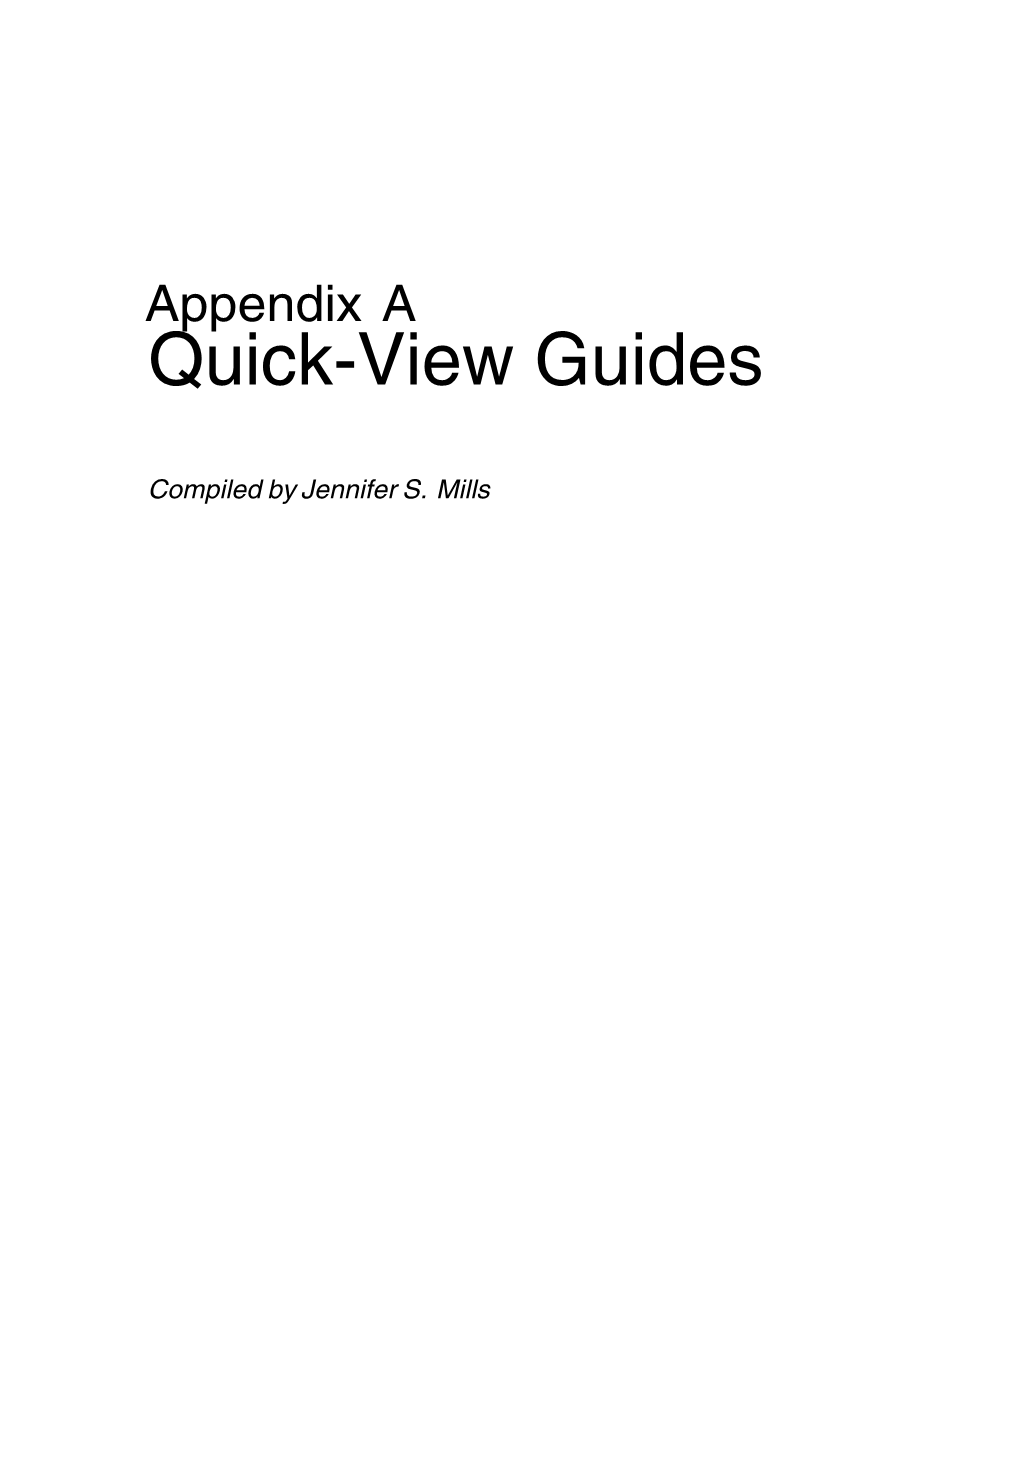 Quick-View Guides